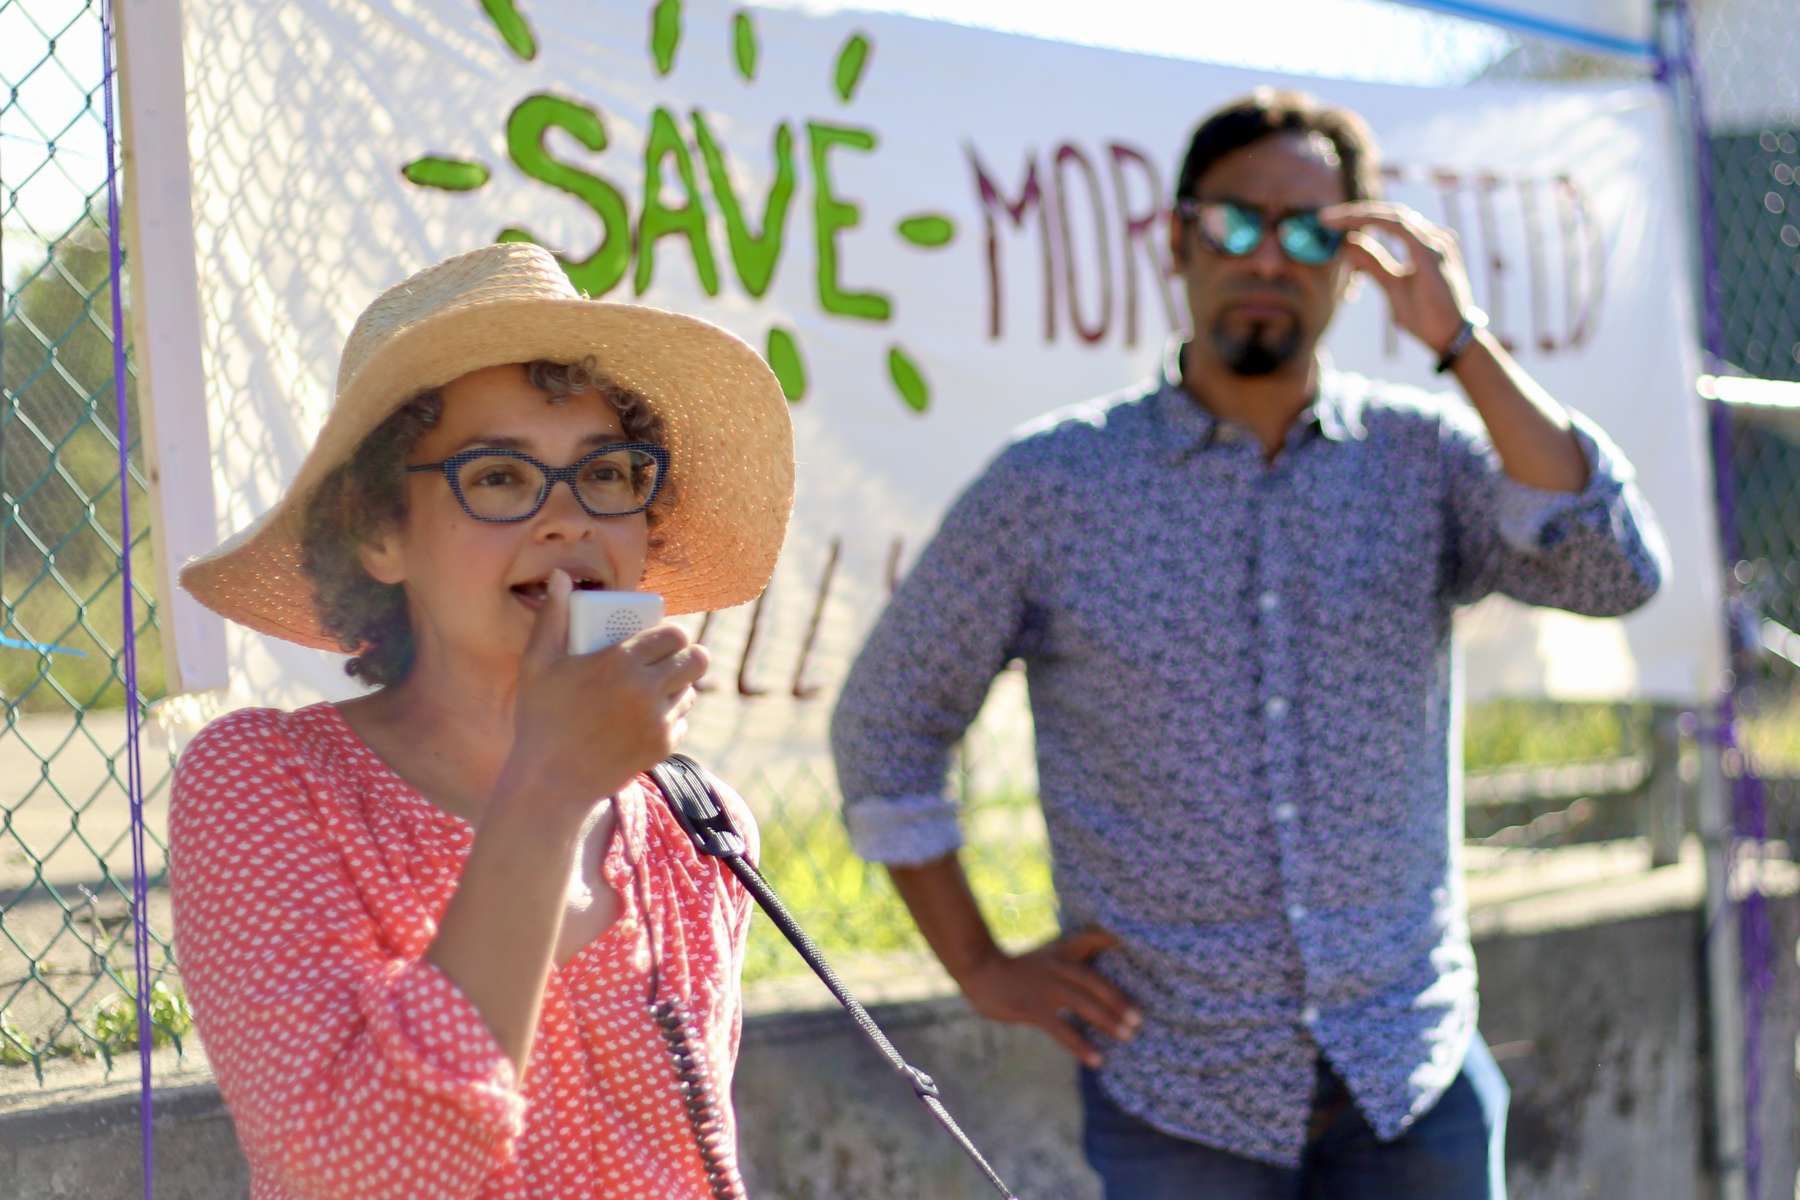 Rhode Island News: Rally to save Morley Field shows opposition to paving greenspace gaining momentum